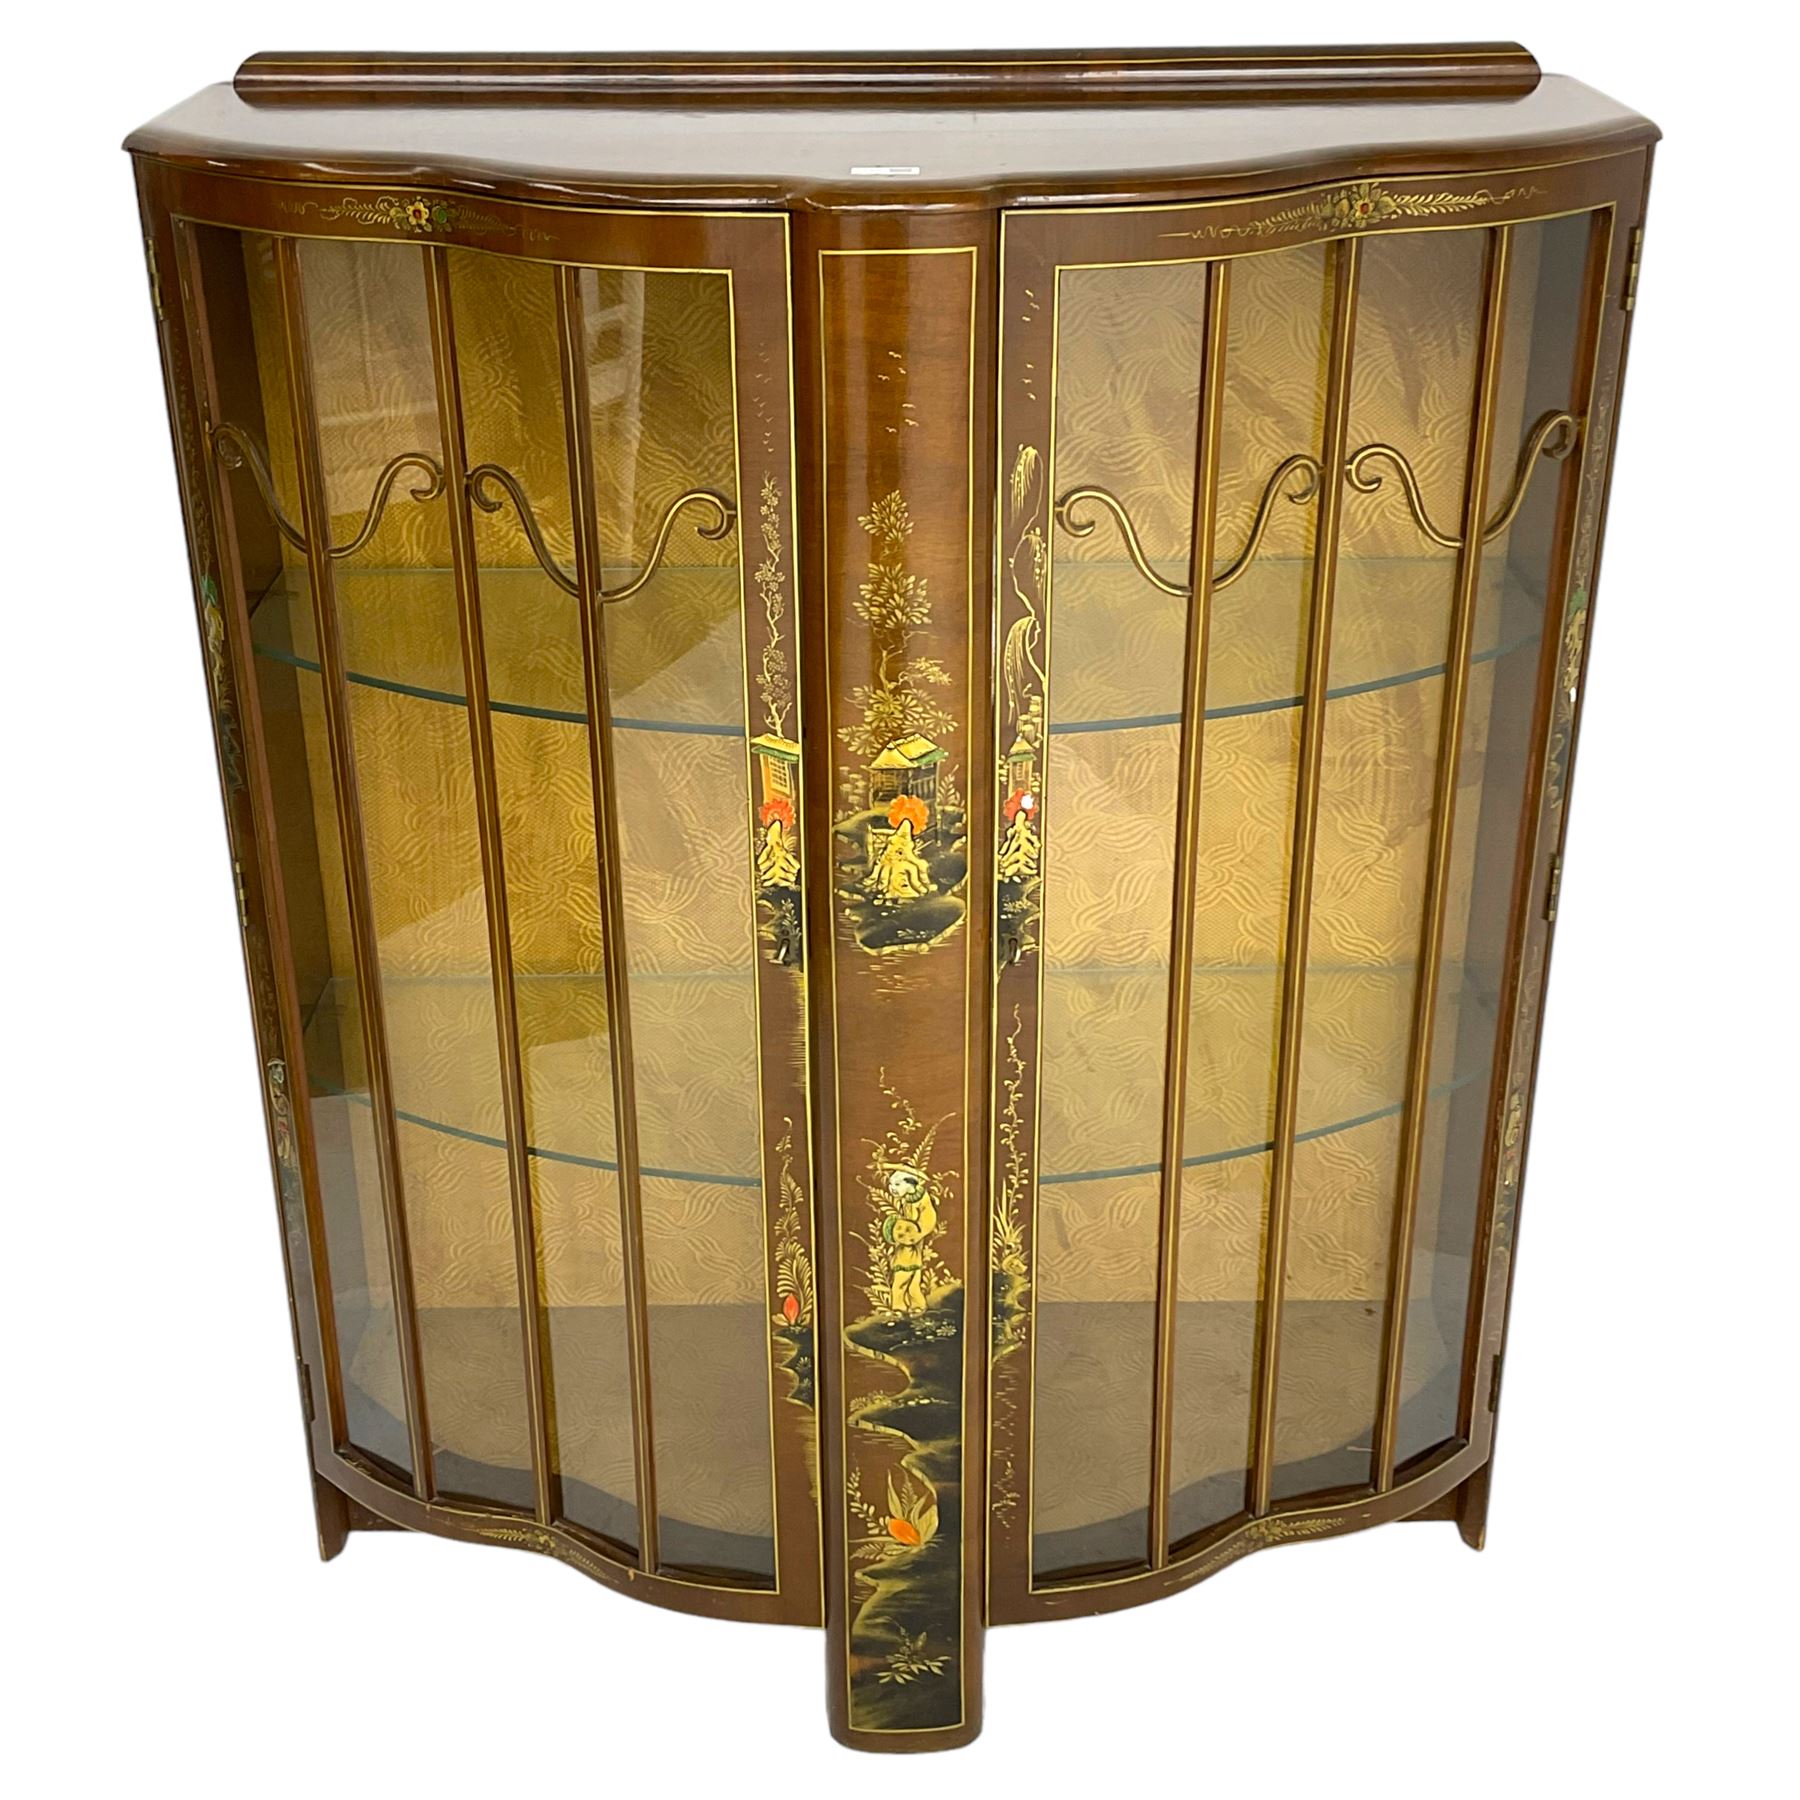 Early 20th century walnut display cabinet with Chinoiserie decoration